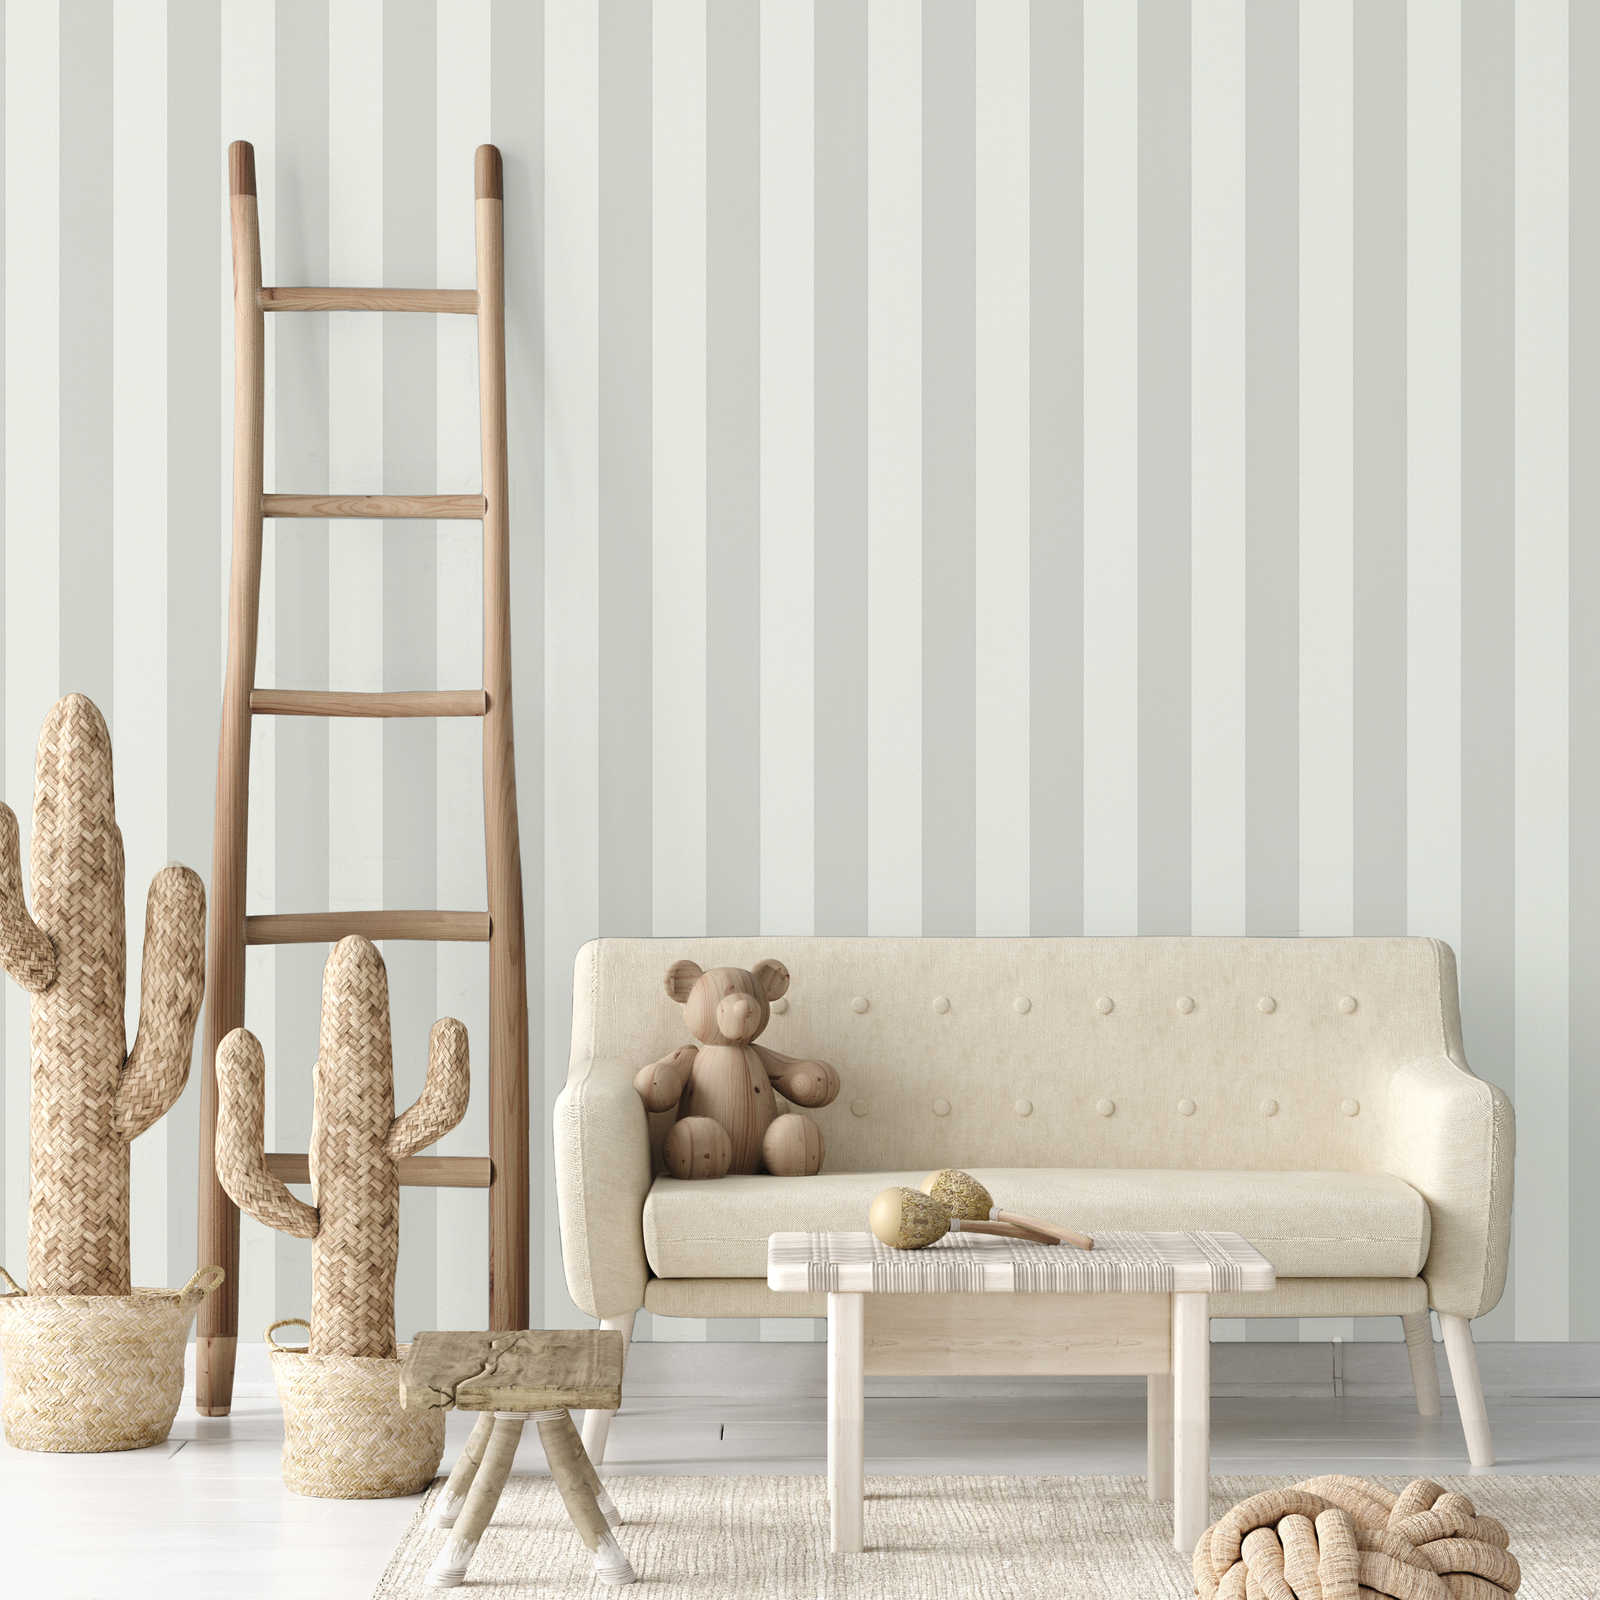             Stripes wallpaper with textured pattern, block stripes grey & white
        